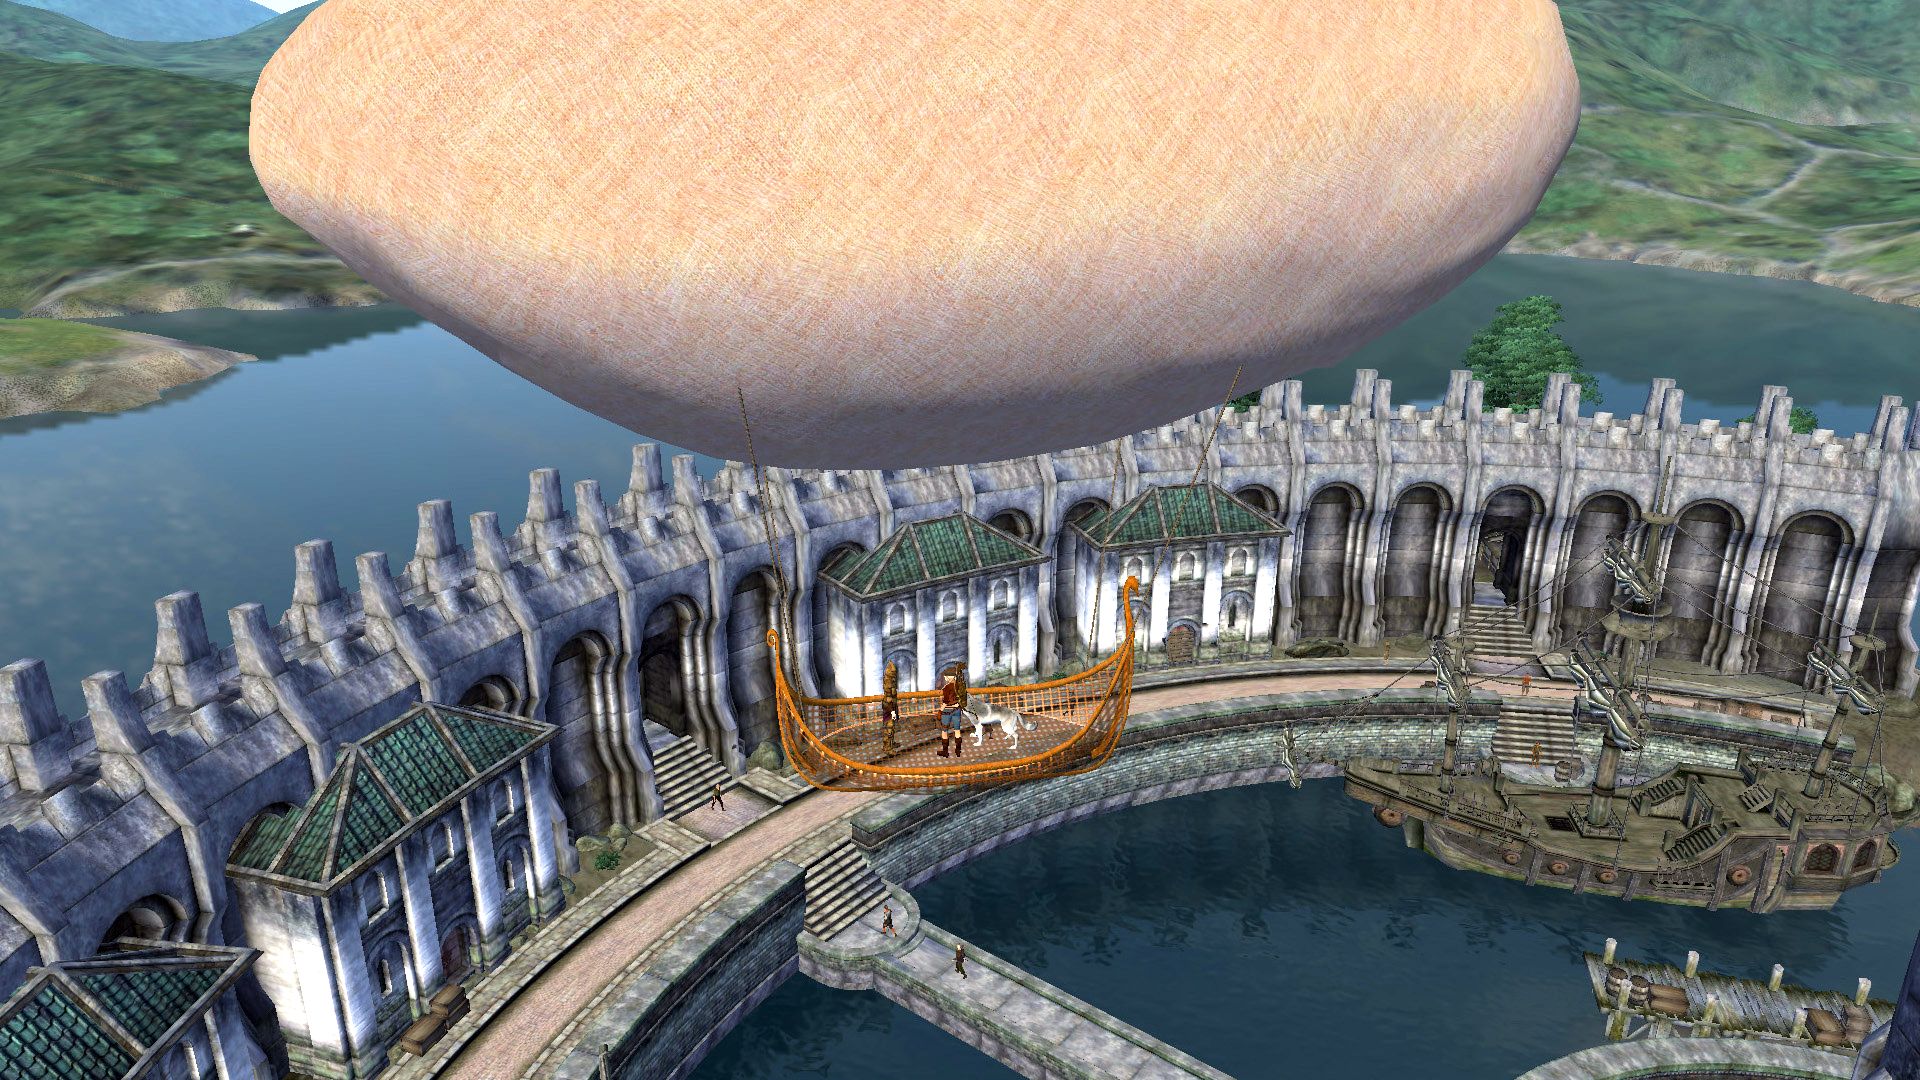 This Elder Scrolls 4 Oblivion mod lets you take to Cyrodiil's skies in an airship